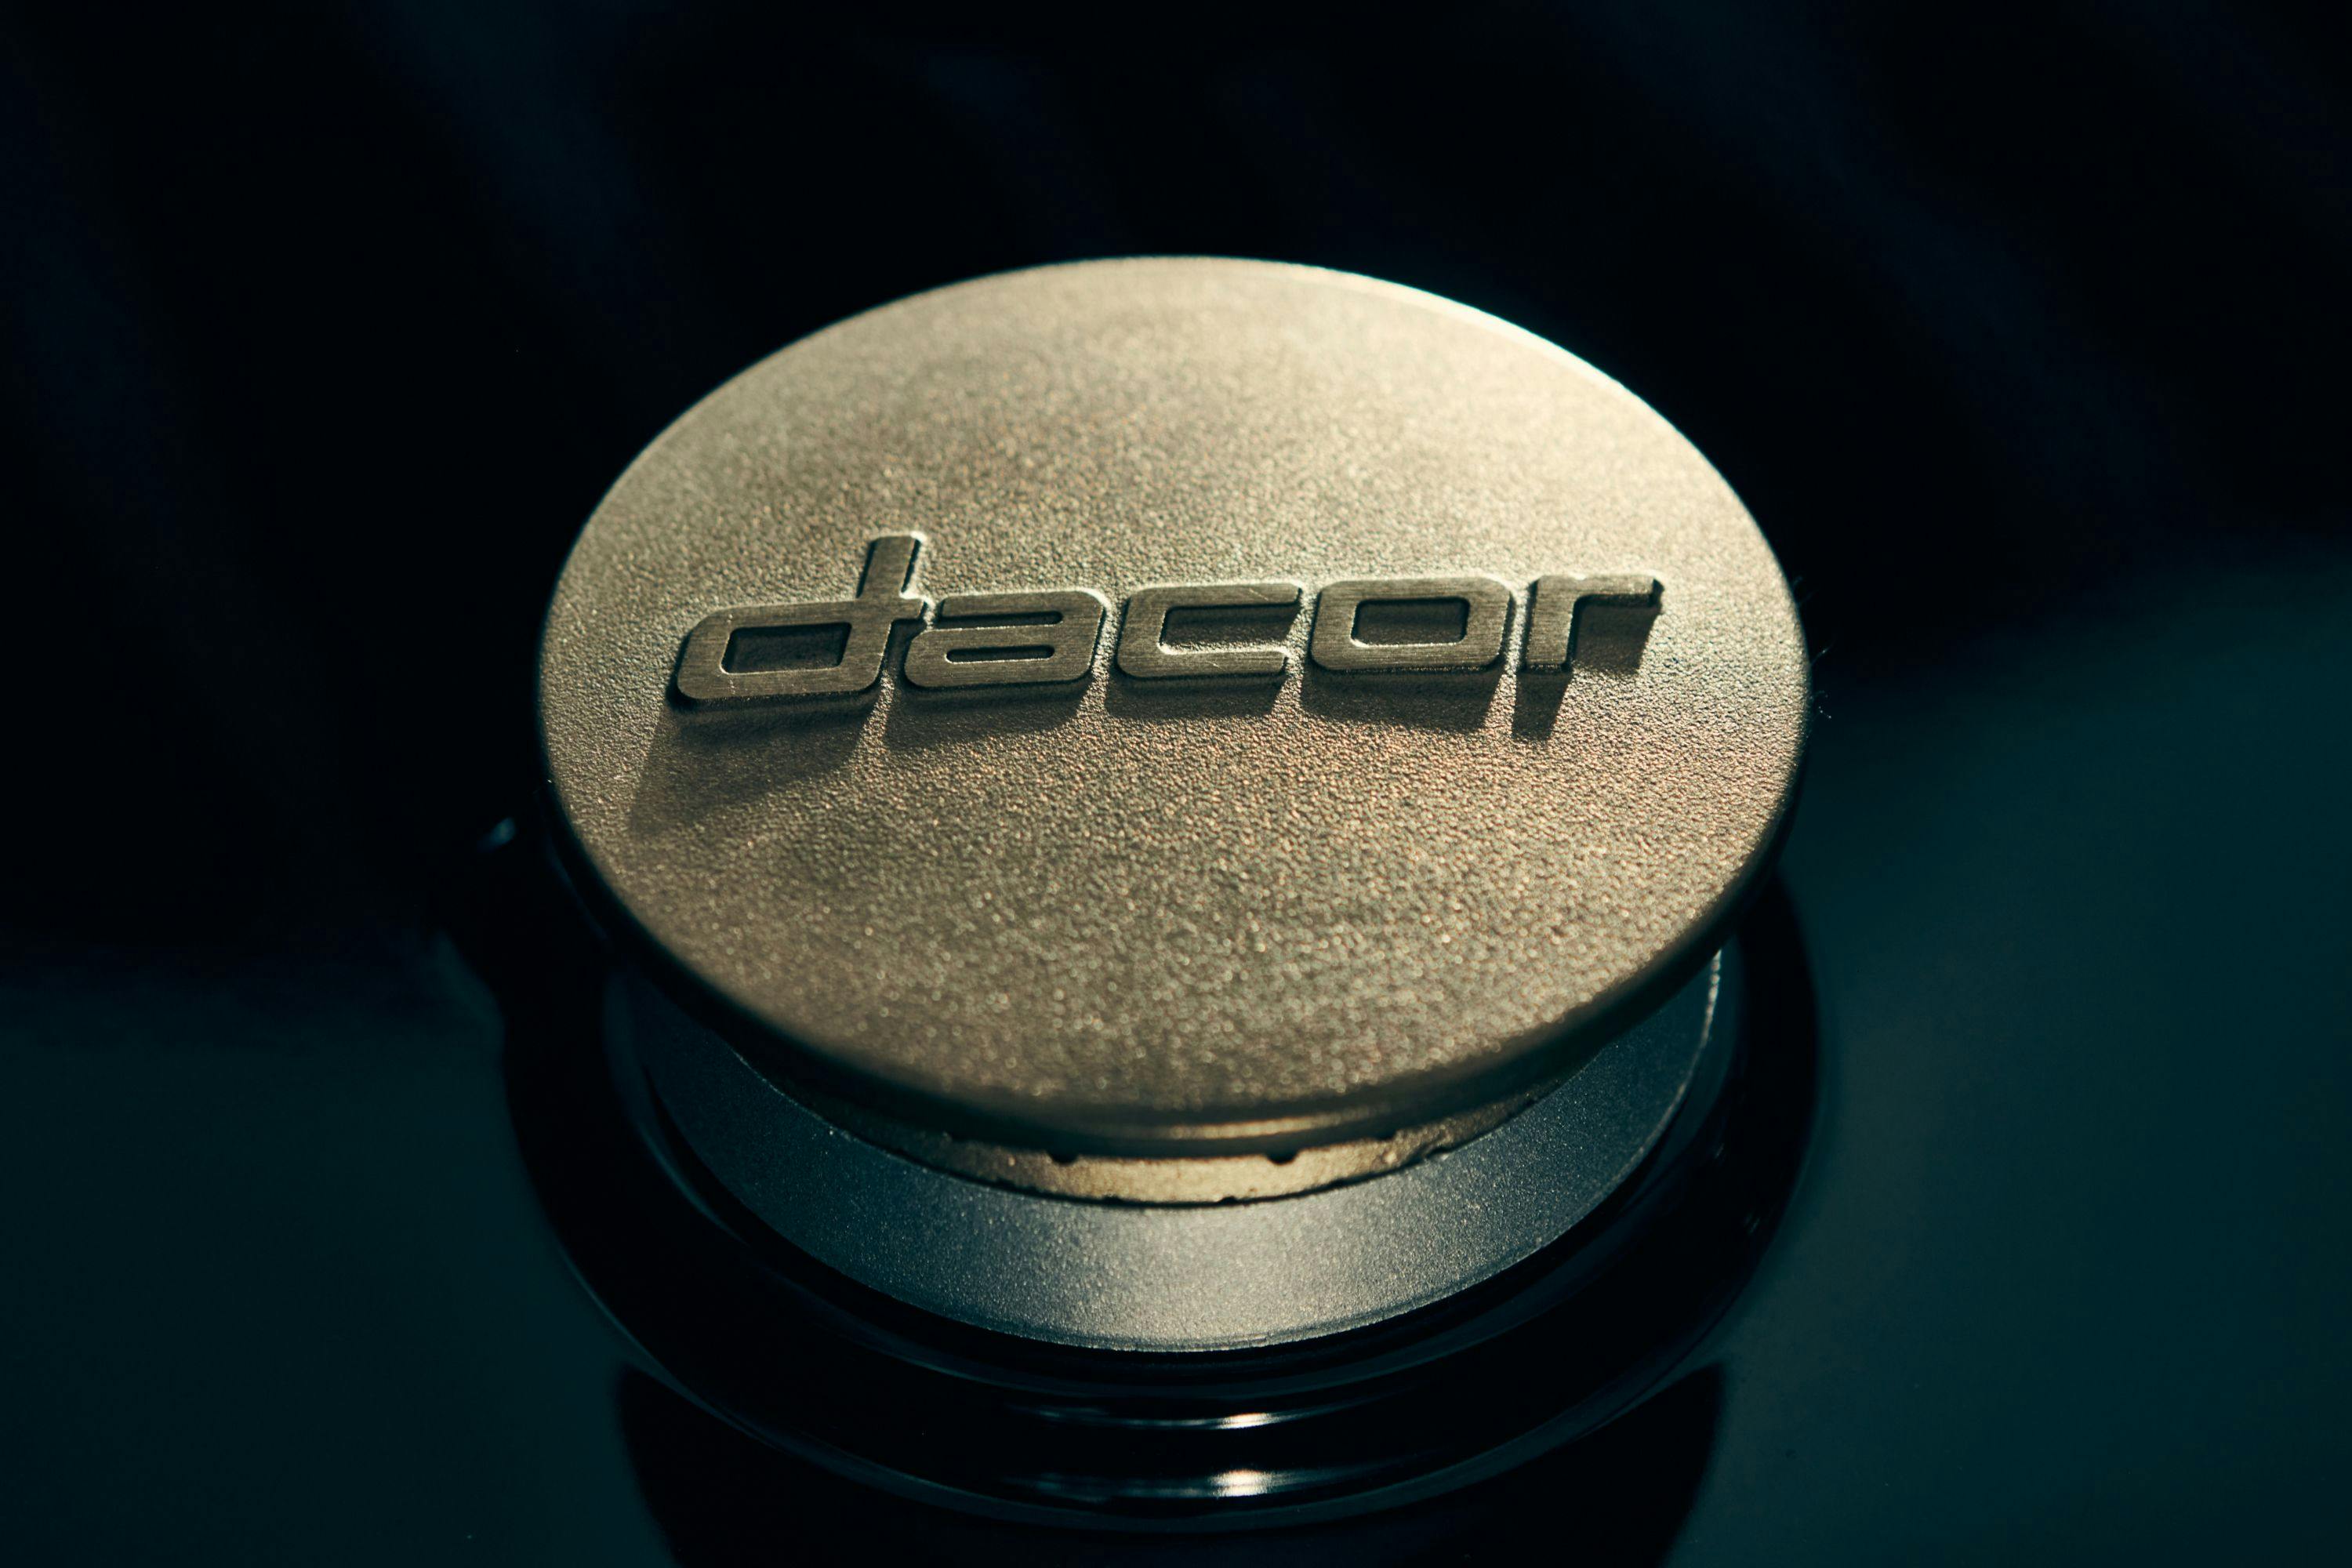 Stove burner emblazoned with the Dacor logo 